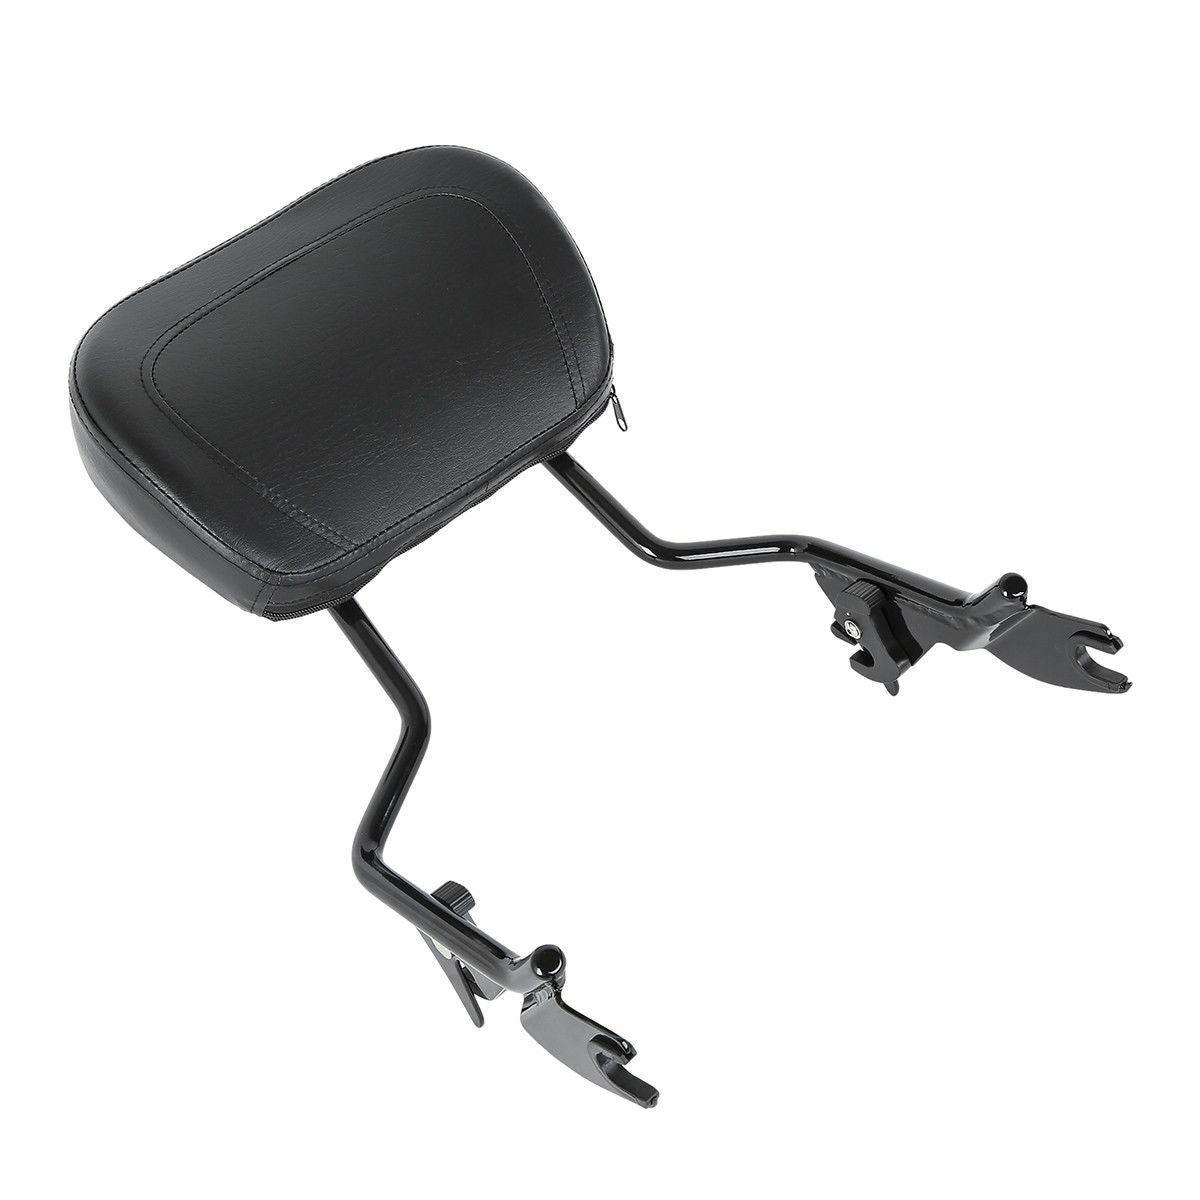 Backrest Sissy Bar Stealth Luggage Rack Dock Hardware For Harley Touring 09-13 - Moto Life Products